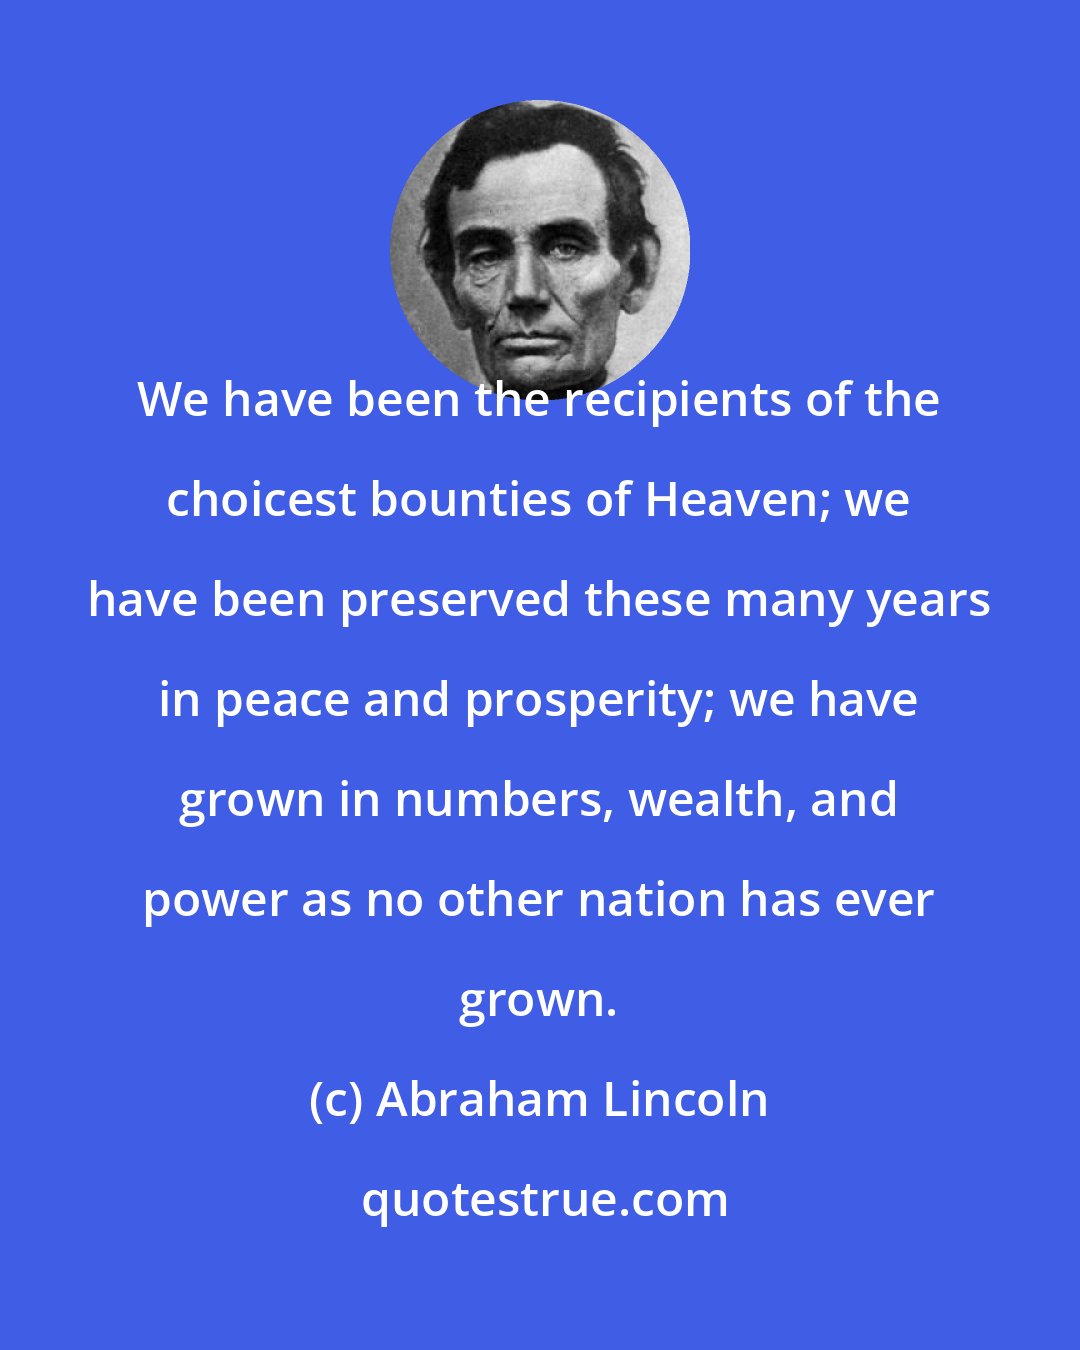 Abraham Lincoln: We have been the recipients of the choicest bounties of Heaven; we have been preserved these many years in peace and prosperity; we have grown in numbers, wealth, and power as no other nation has ever grown.